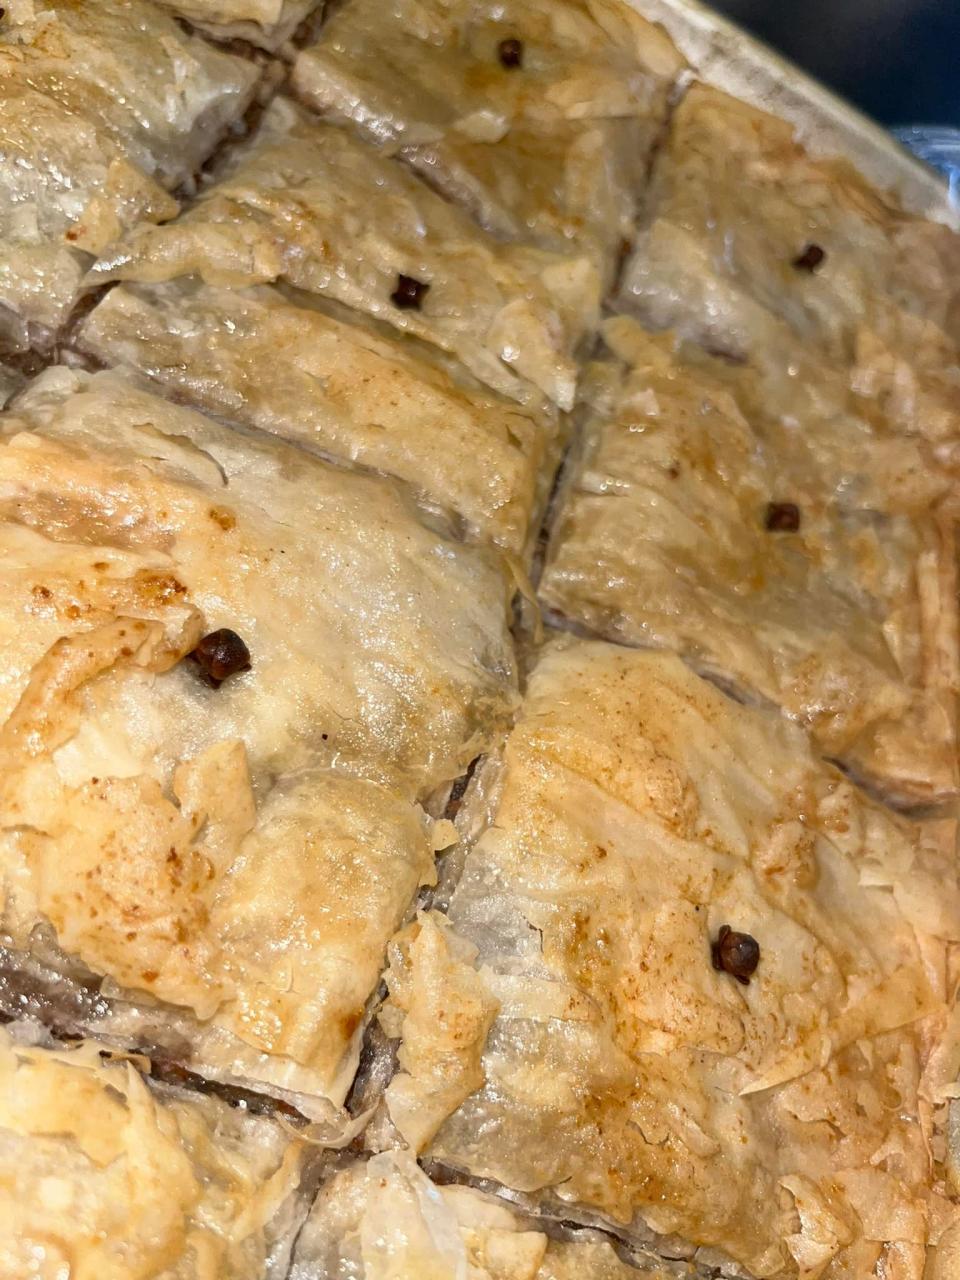 Maria’s Place, 67 Main St., Taunton, is now serving homemade baklava.